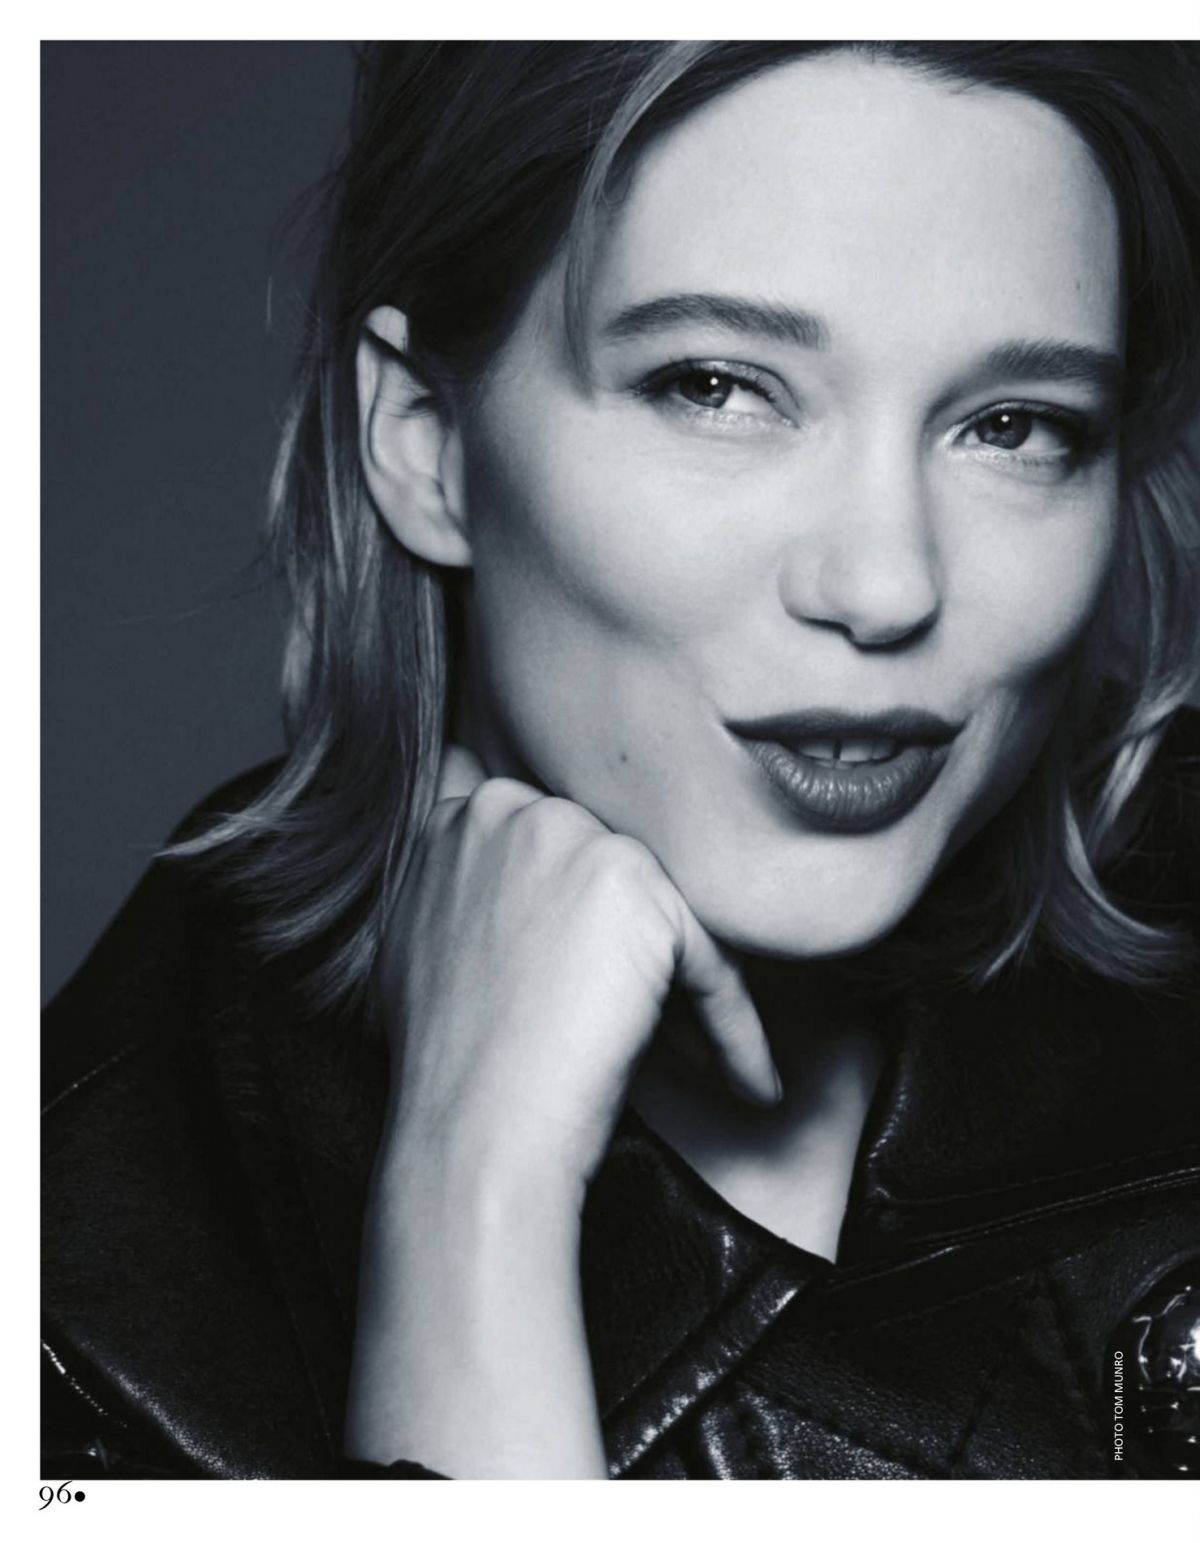 LEA SEYDOUX and ADELE EXARCHOPOULOS in Madame Figaro, May 2023 – HawtCelebs